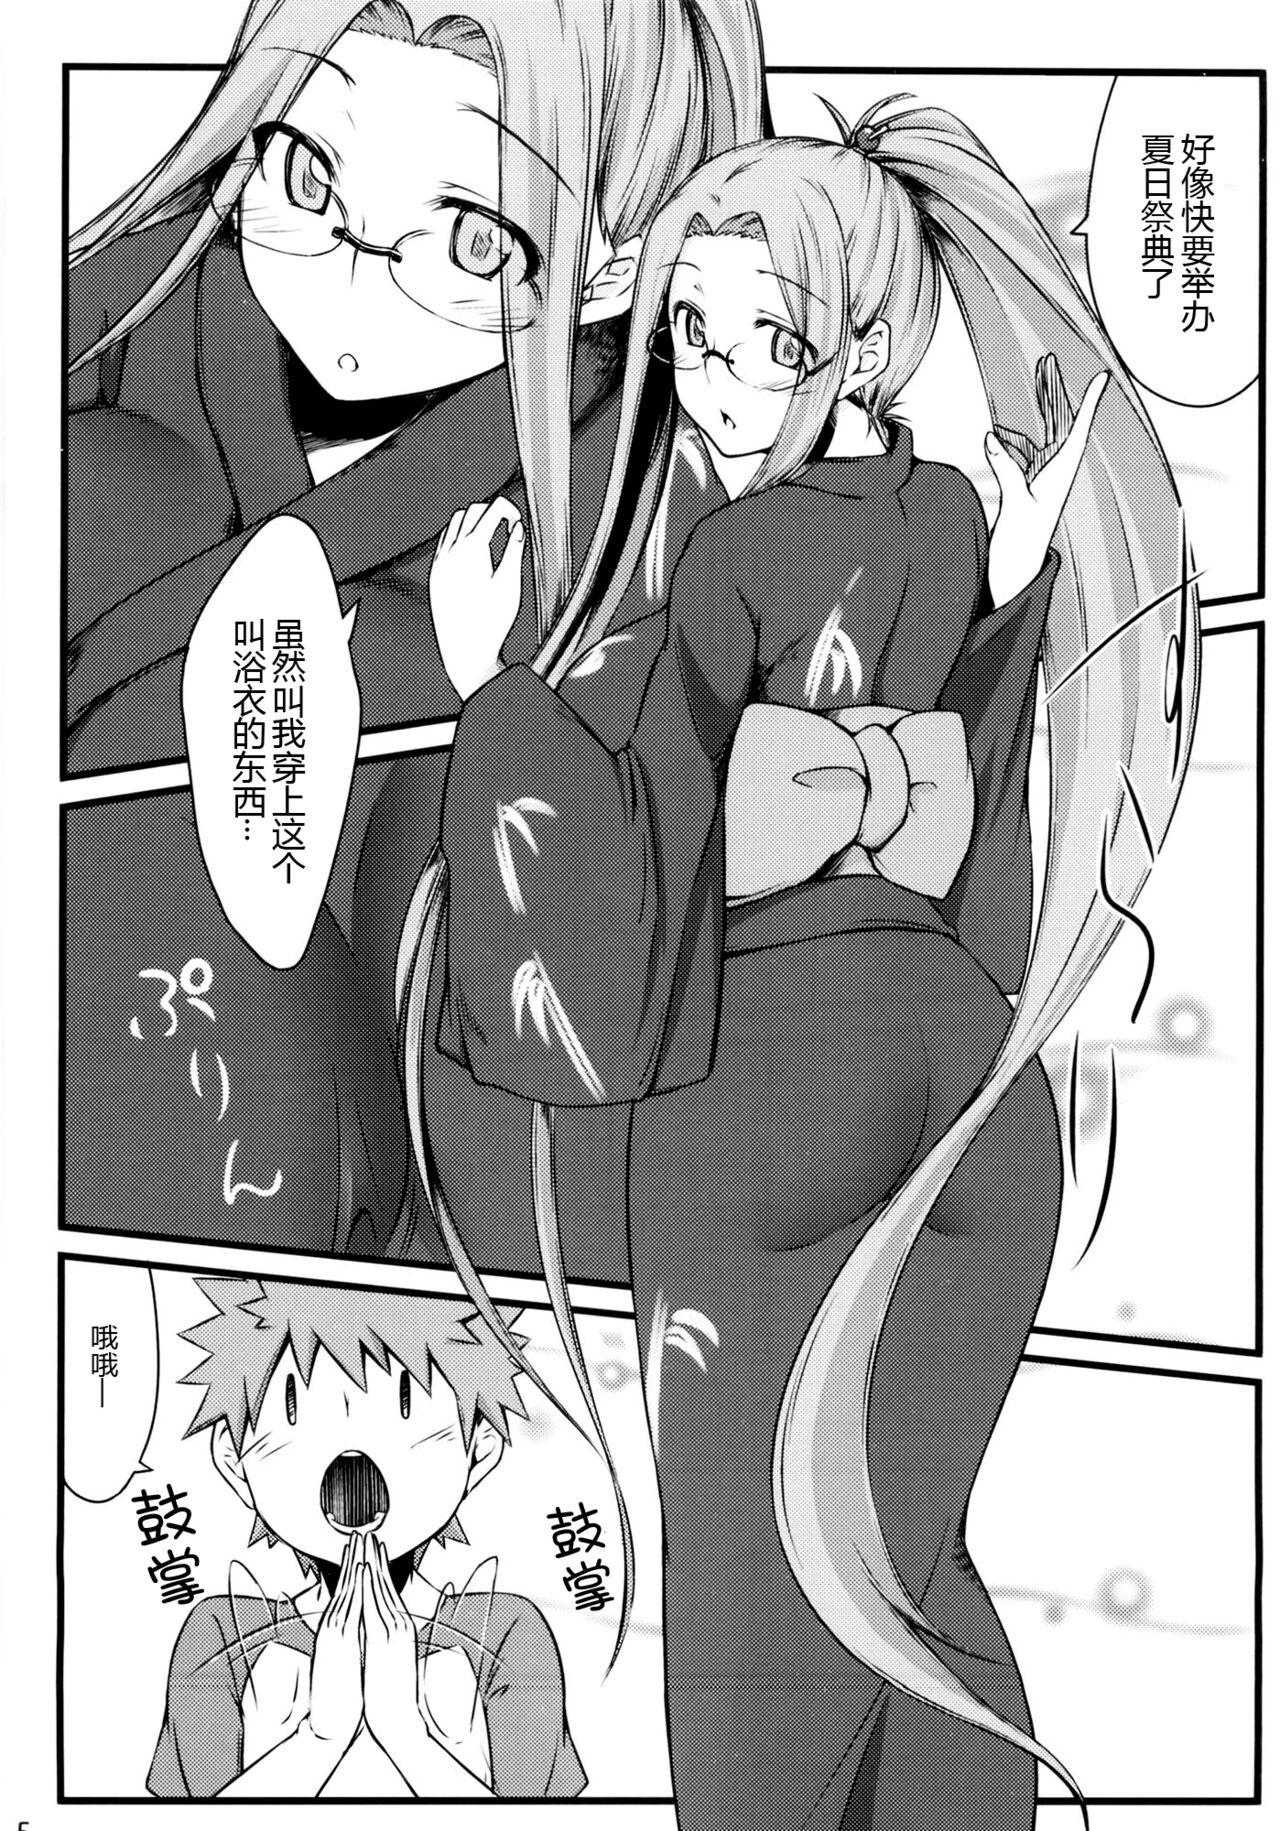 Special Locations R8 - Fate stay night Fate hollow ataraxia Cheating Wife - Page 5